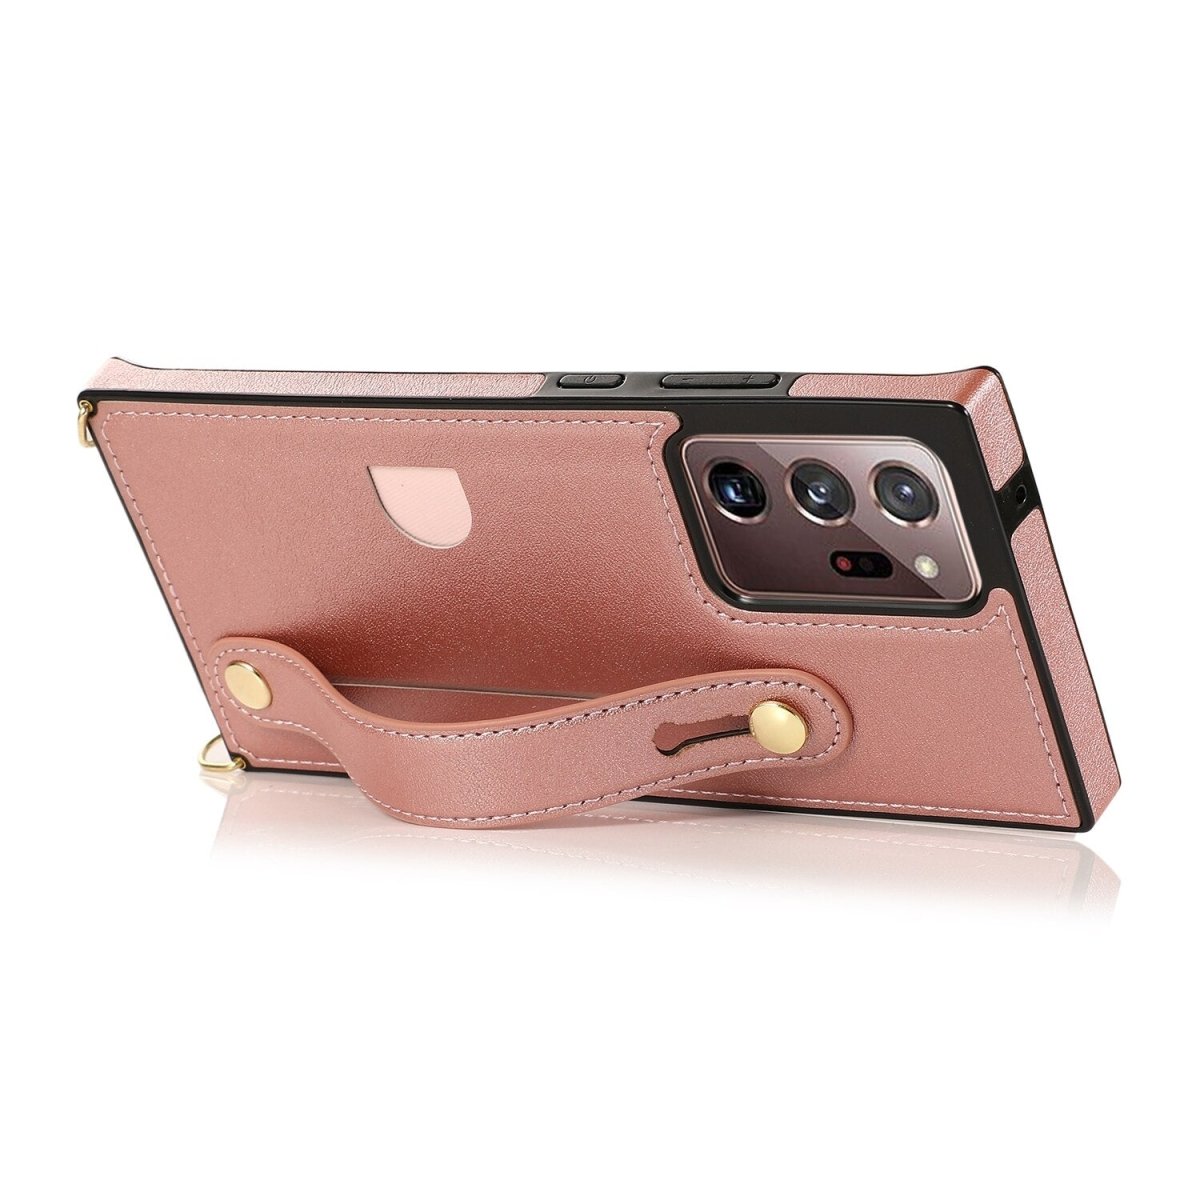 Lapis Slim Leather Galaxy Note Shockproof Case With Wrist Strap